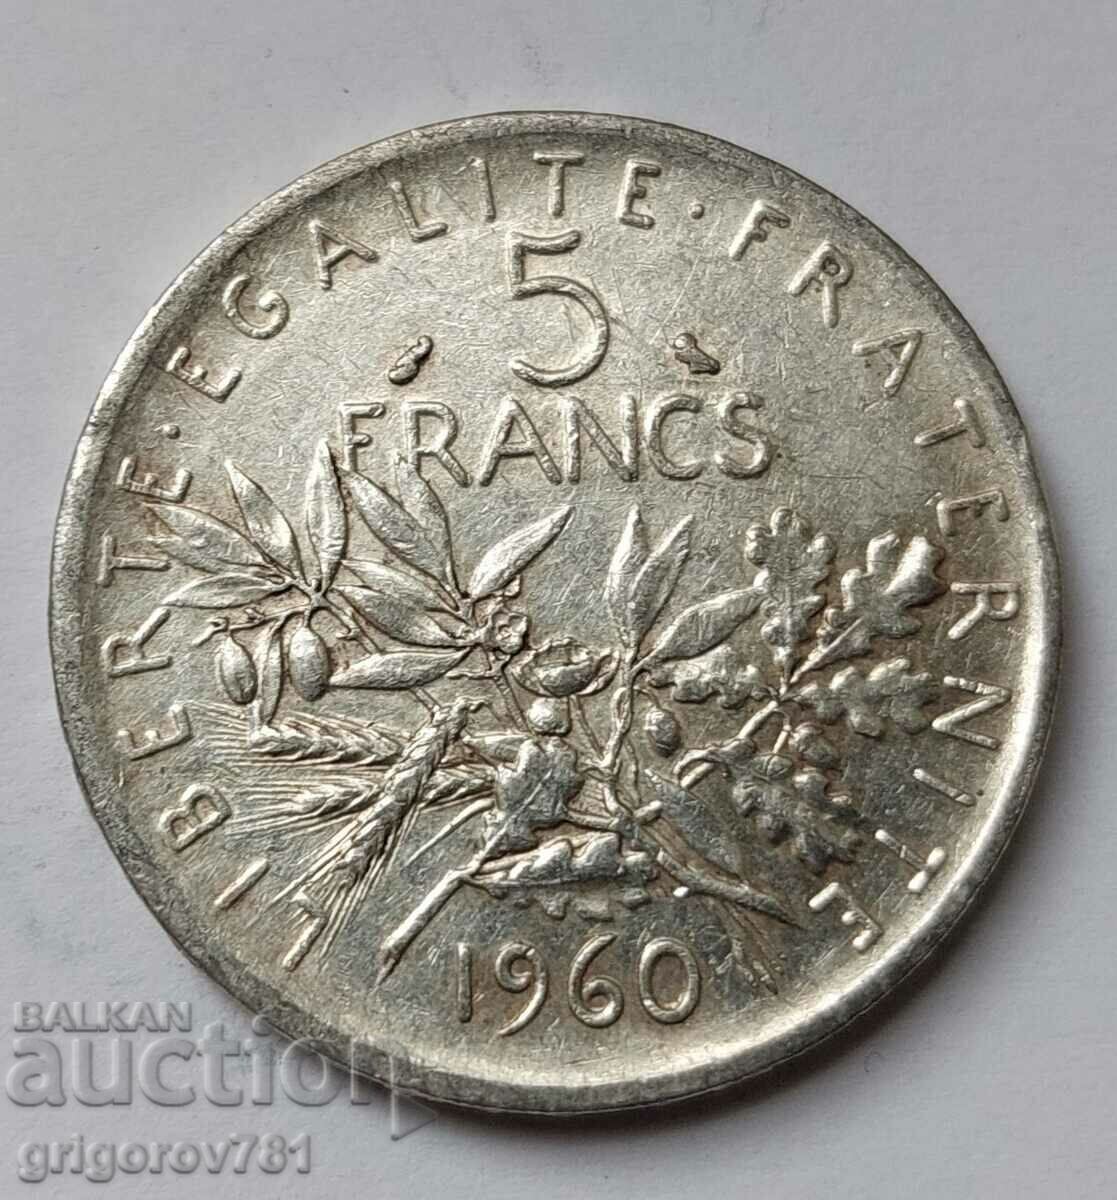 5 Francs Silver France 1960 - Silver Coin #11